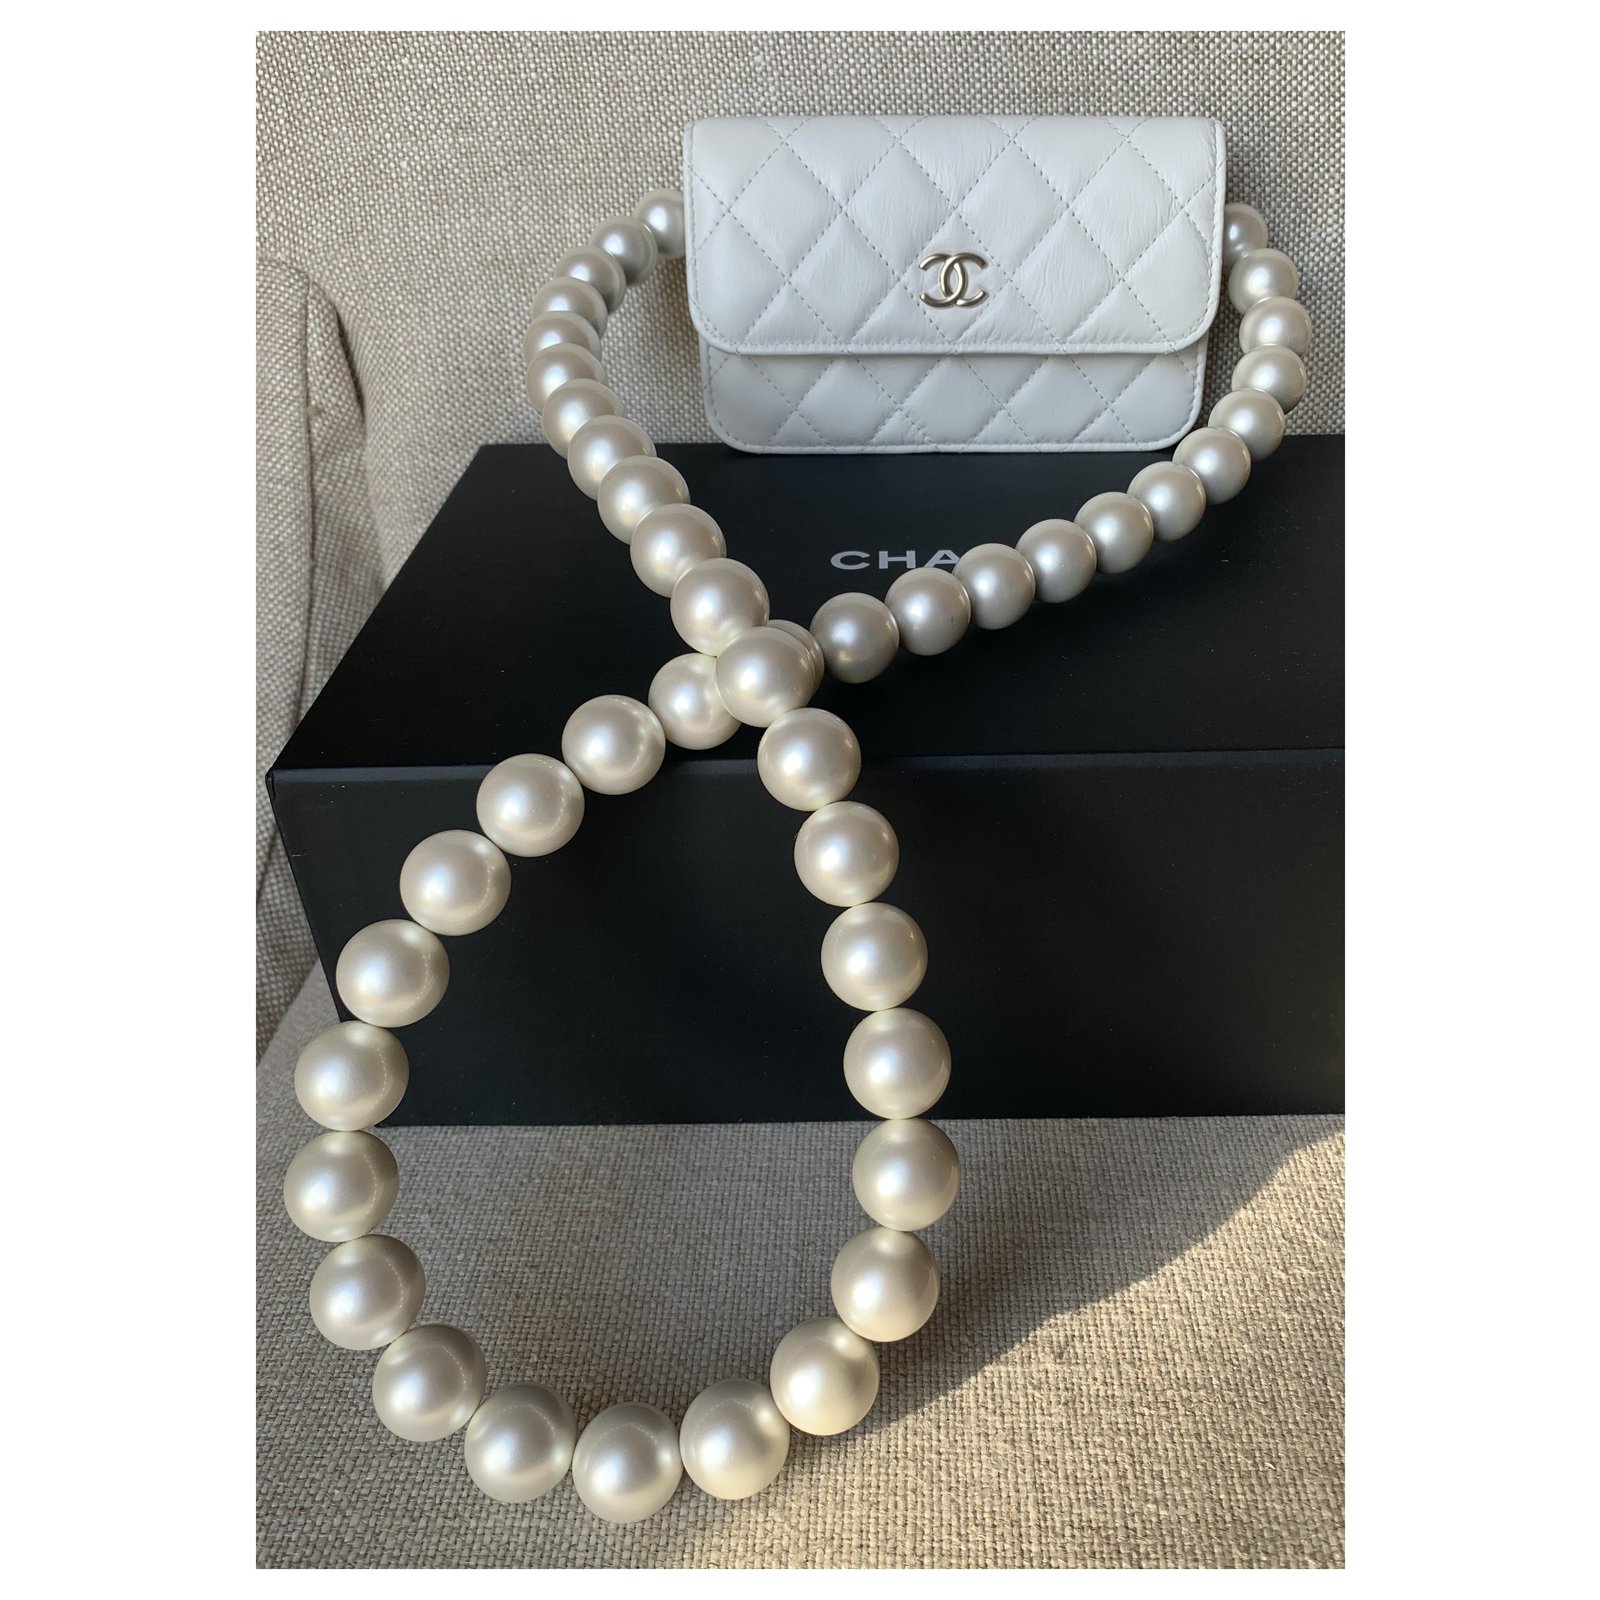 CHANEL Calfskin Quilted Pearl Round Clutch With Chain White 461902